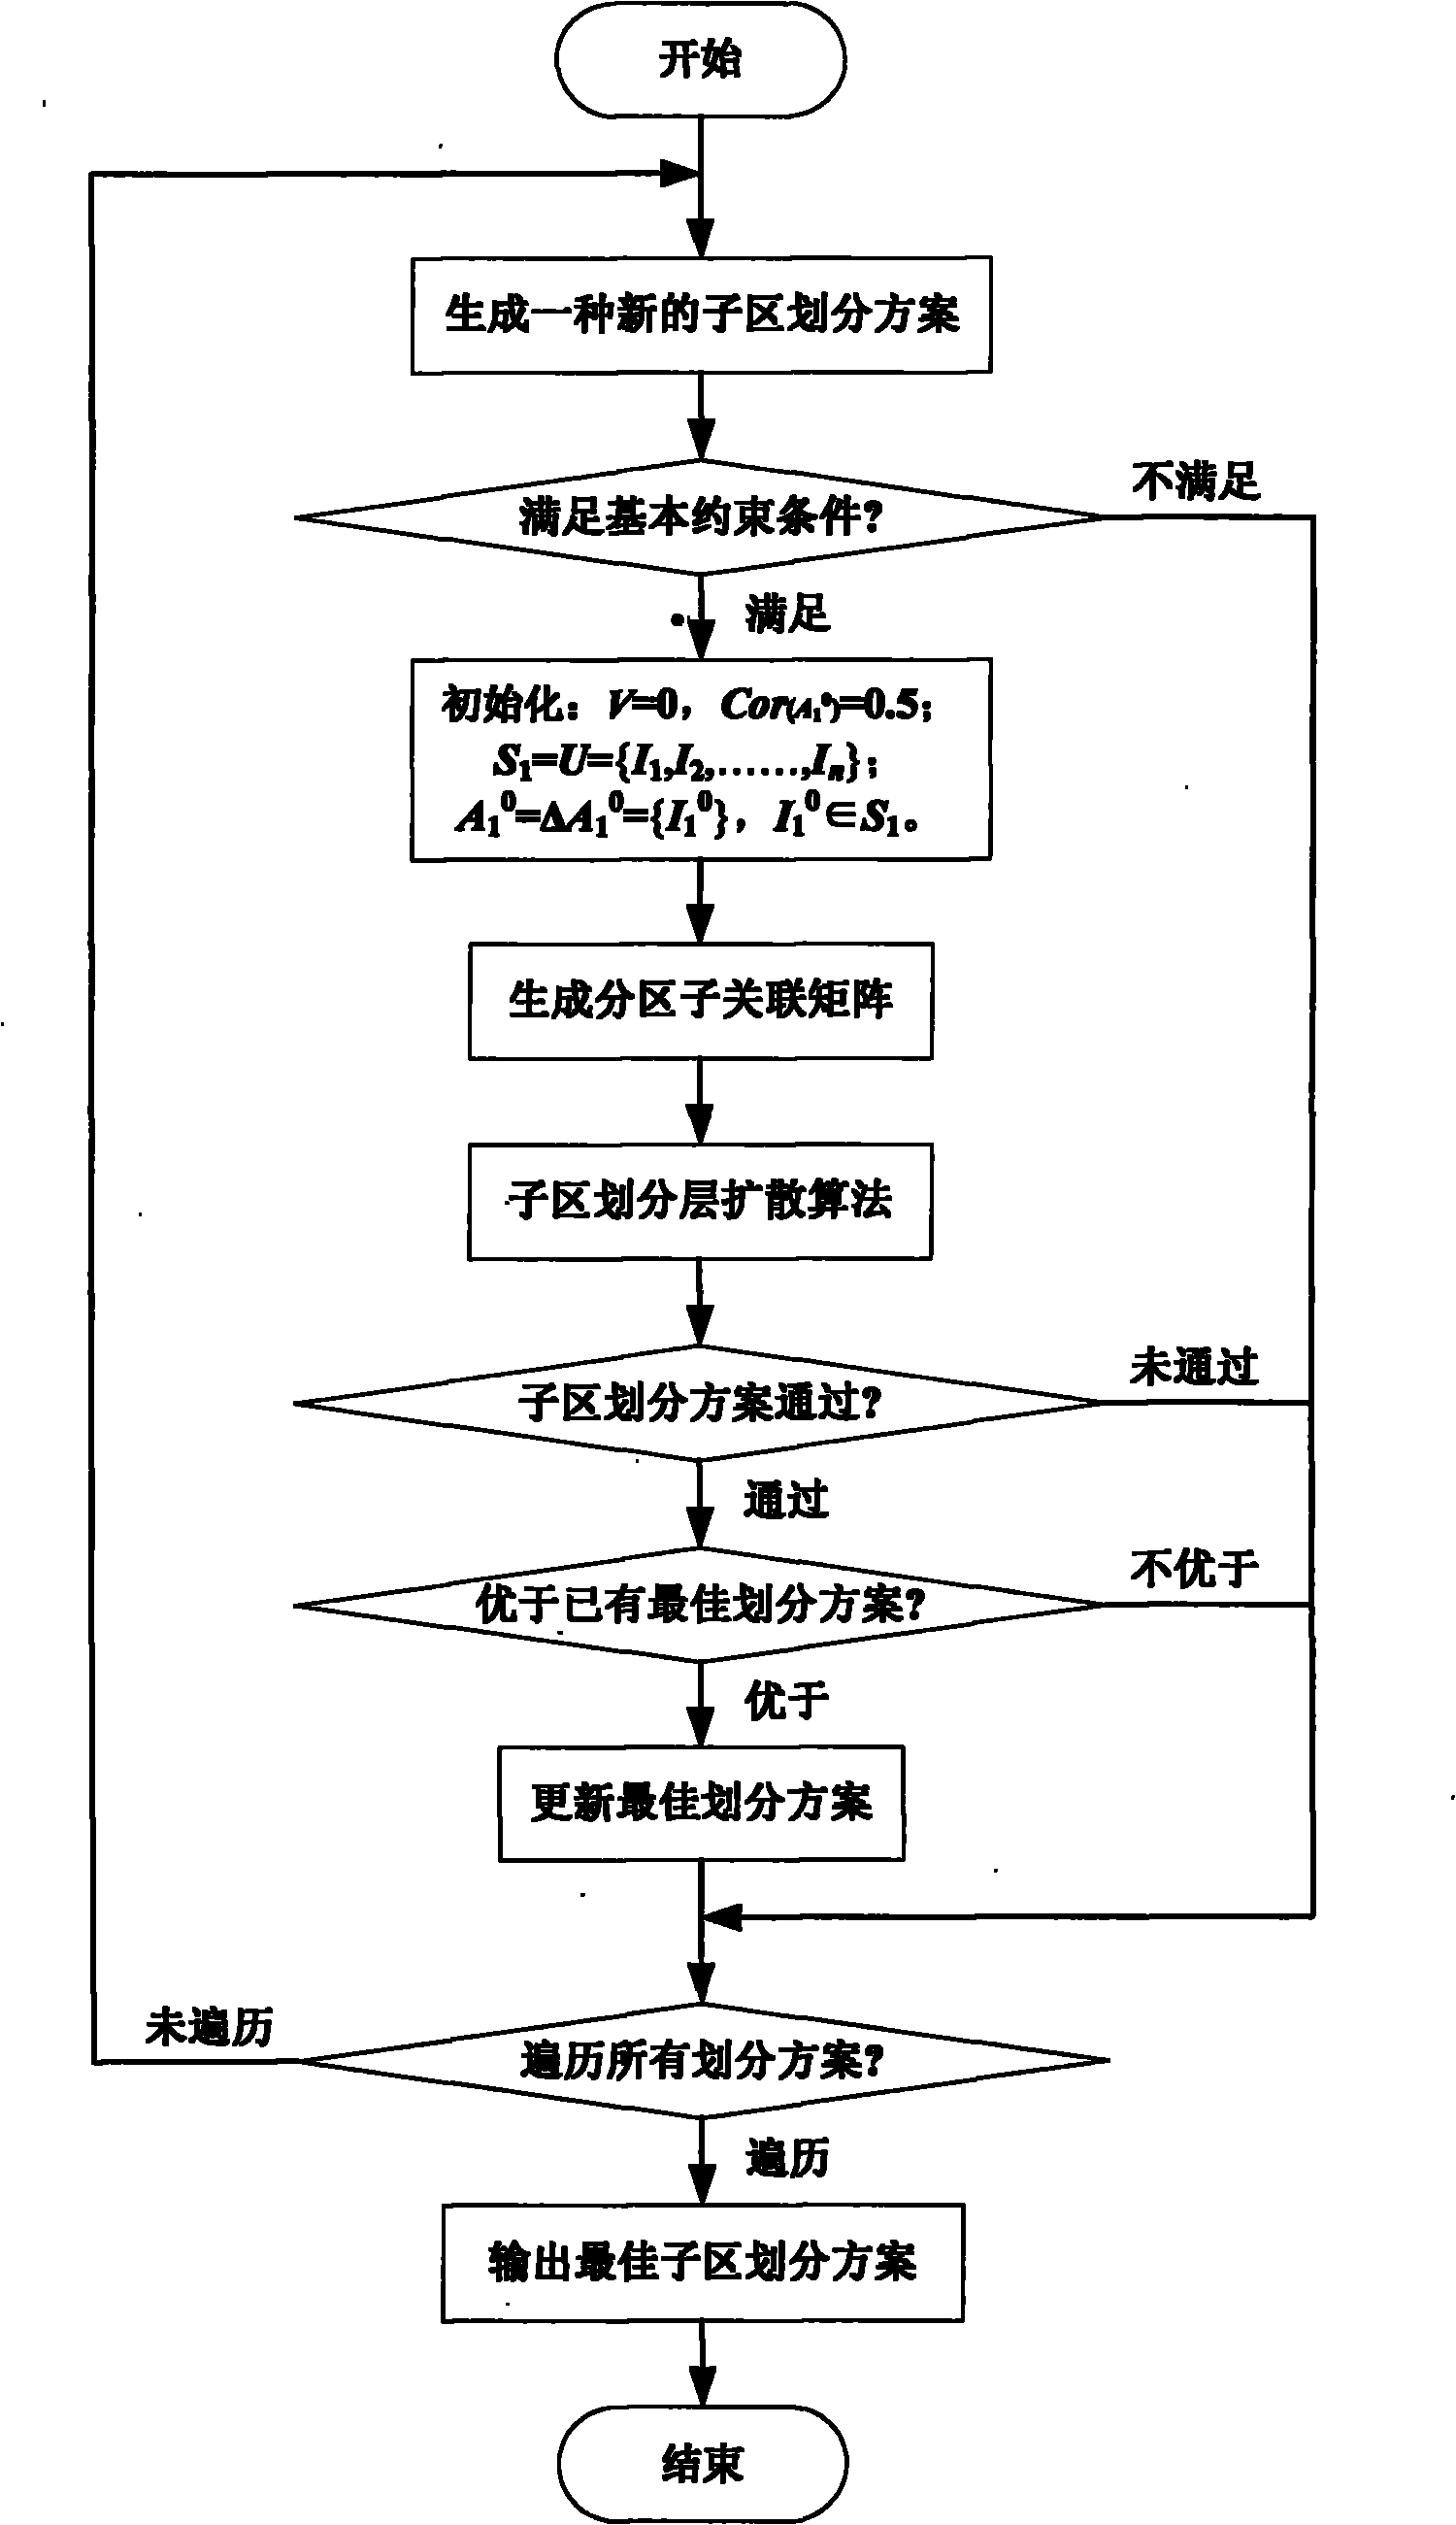 Method capable of dynamically partitioning traffic control subregion